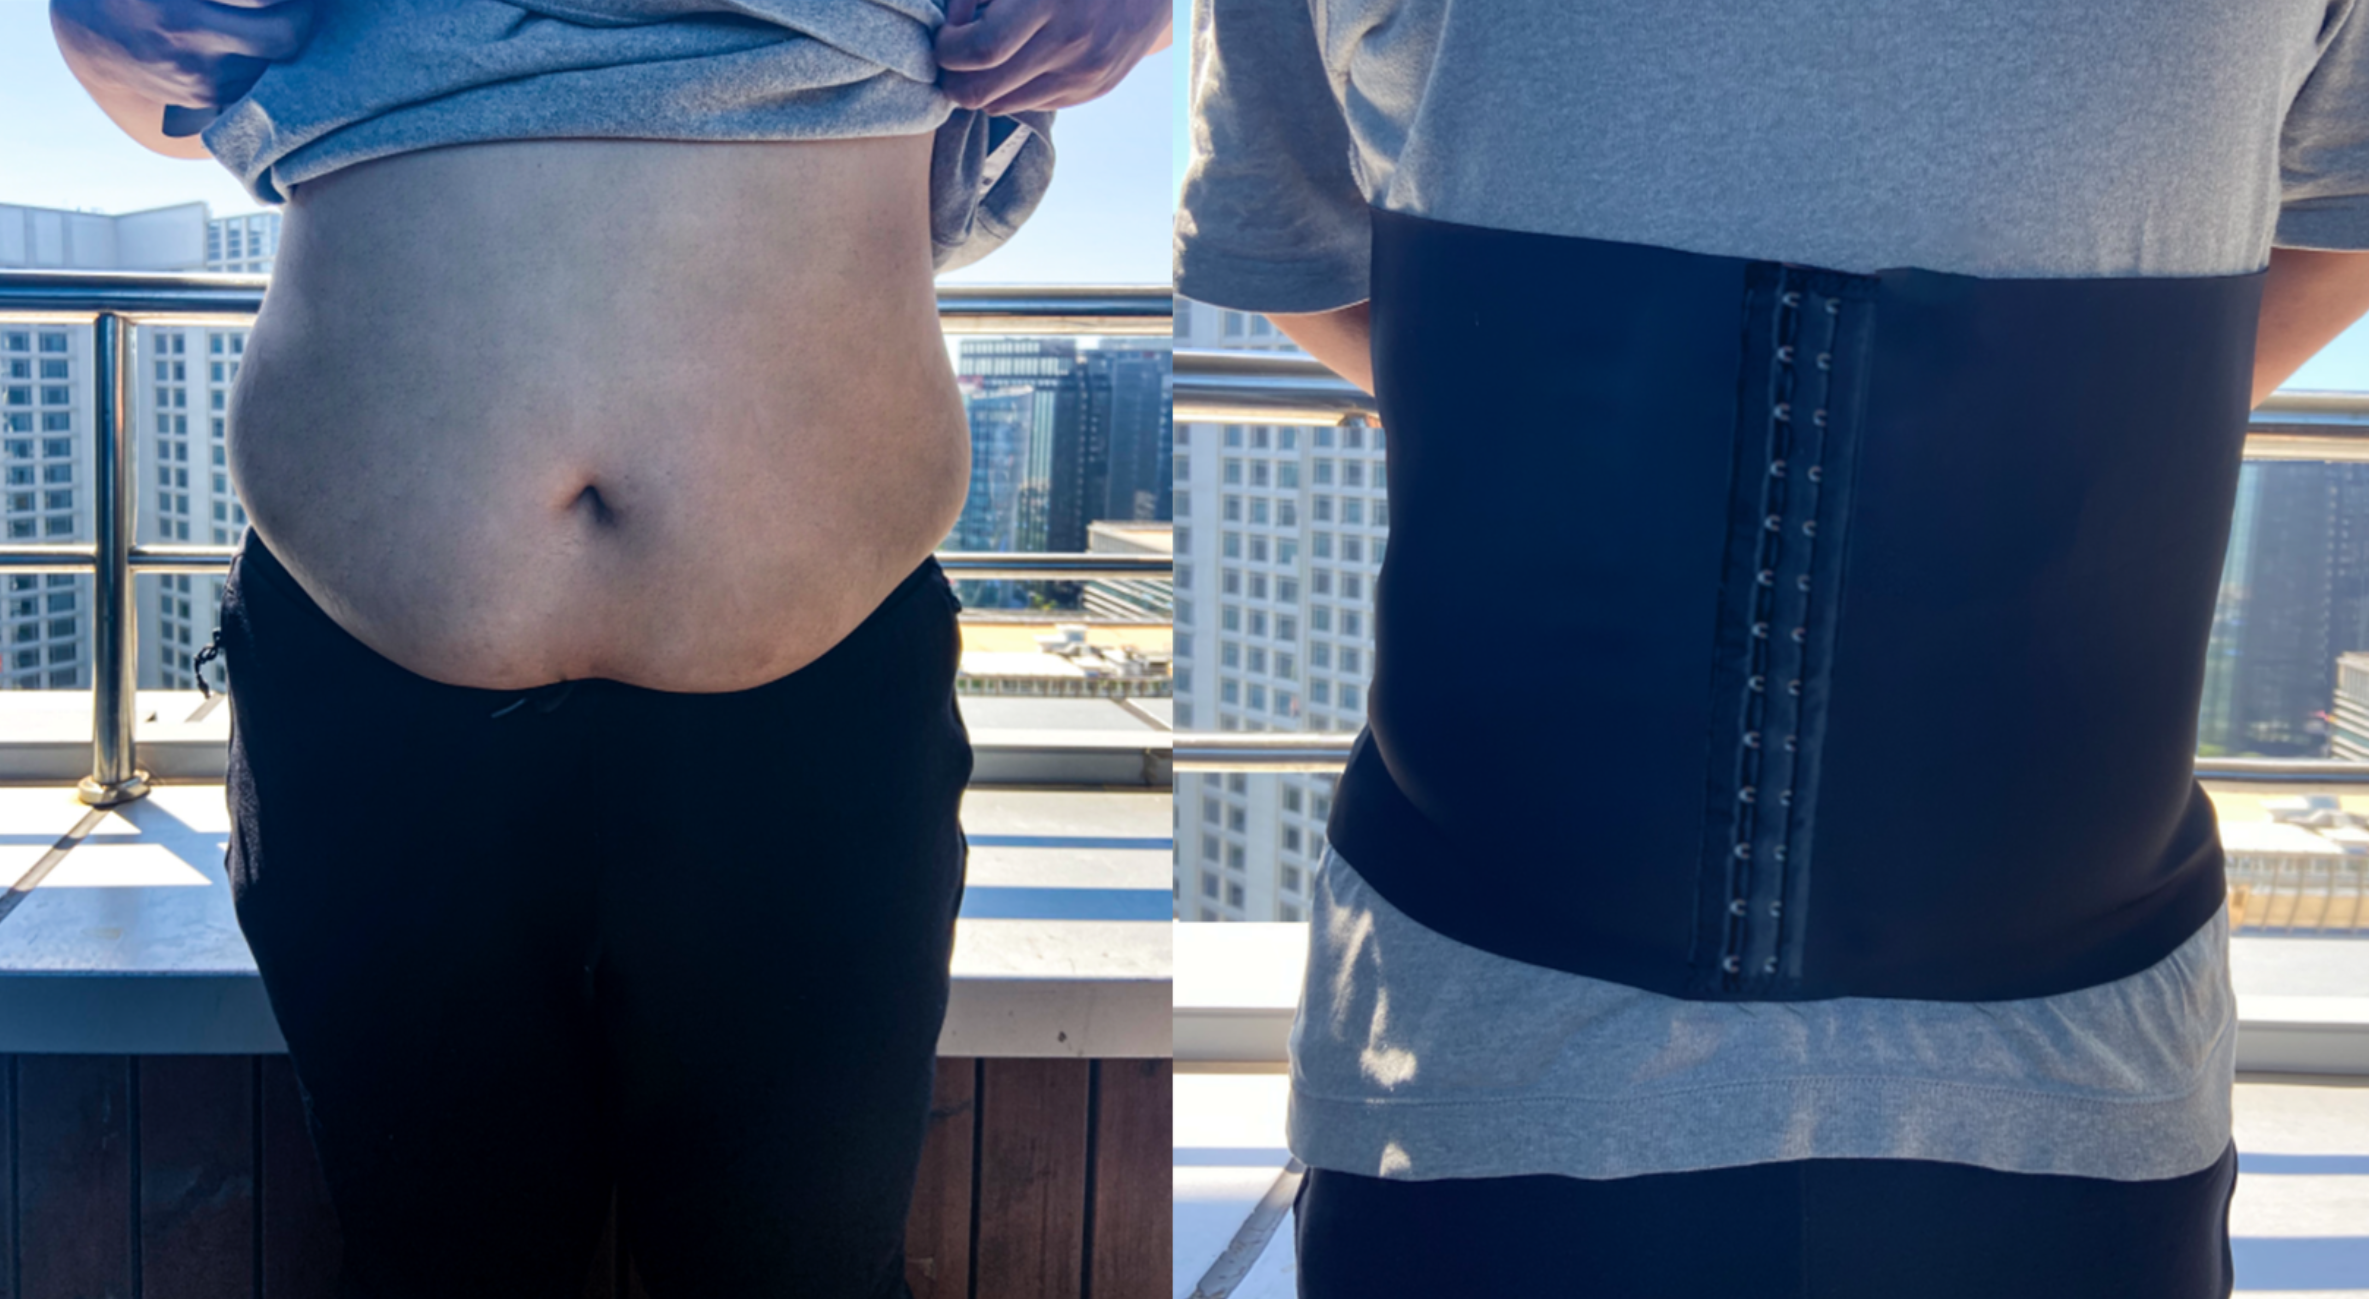 Can Waist Trainers Reduce Belly Fat? Waist Trainer for Weight Loss